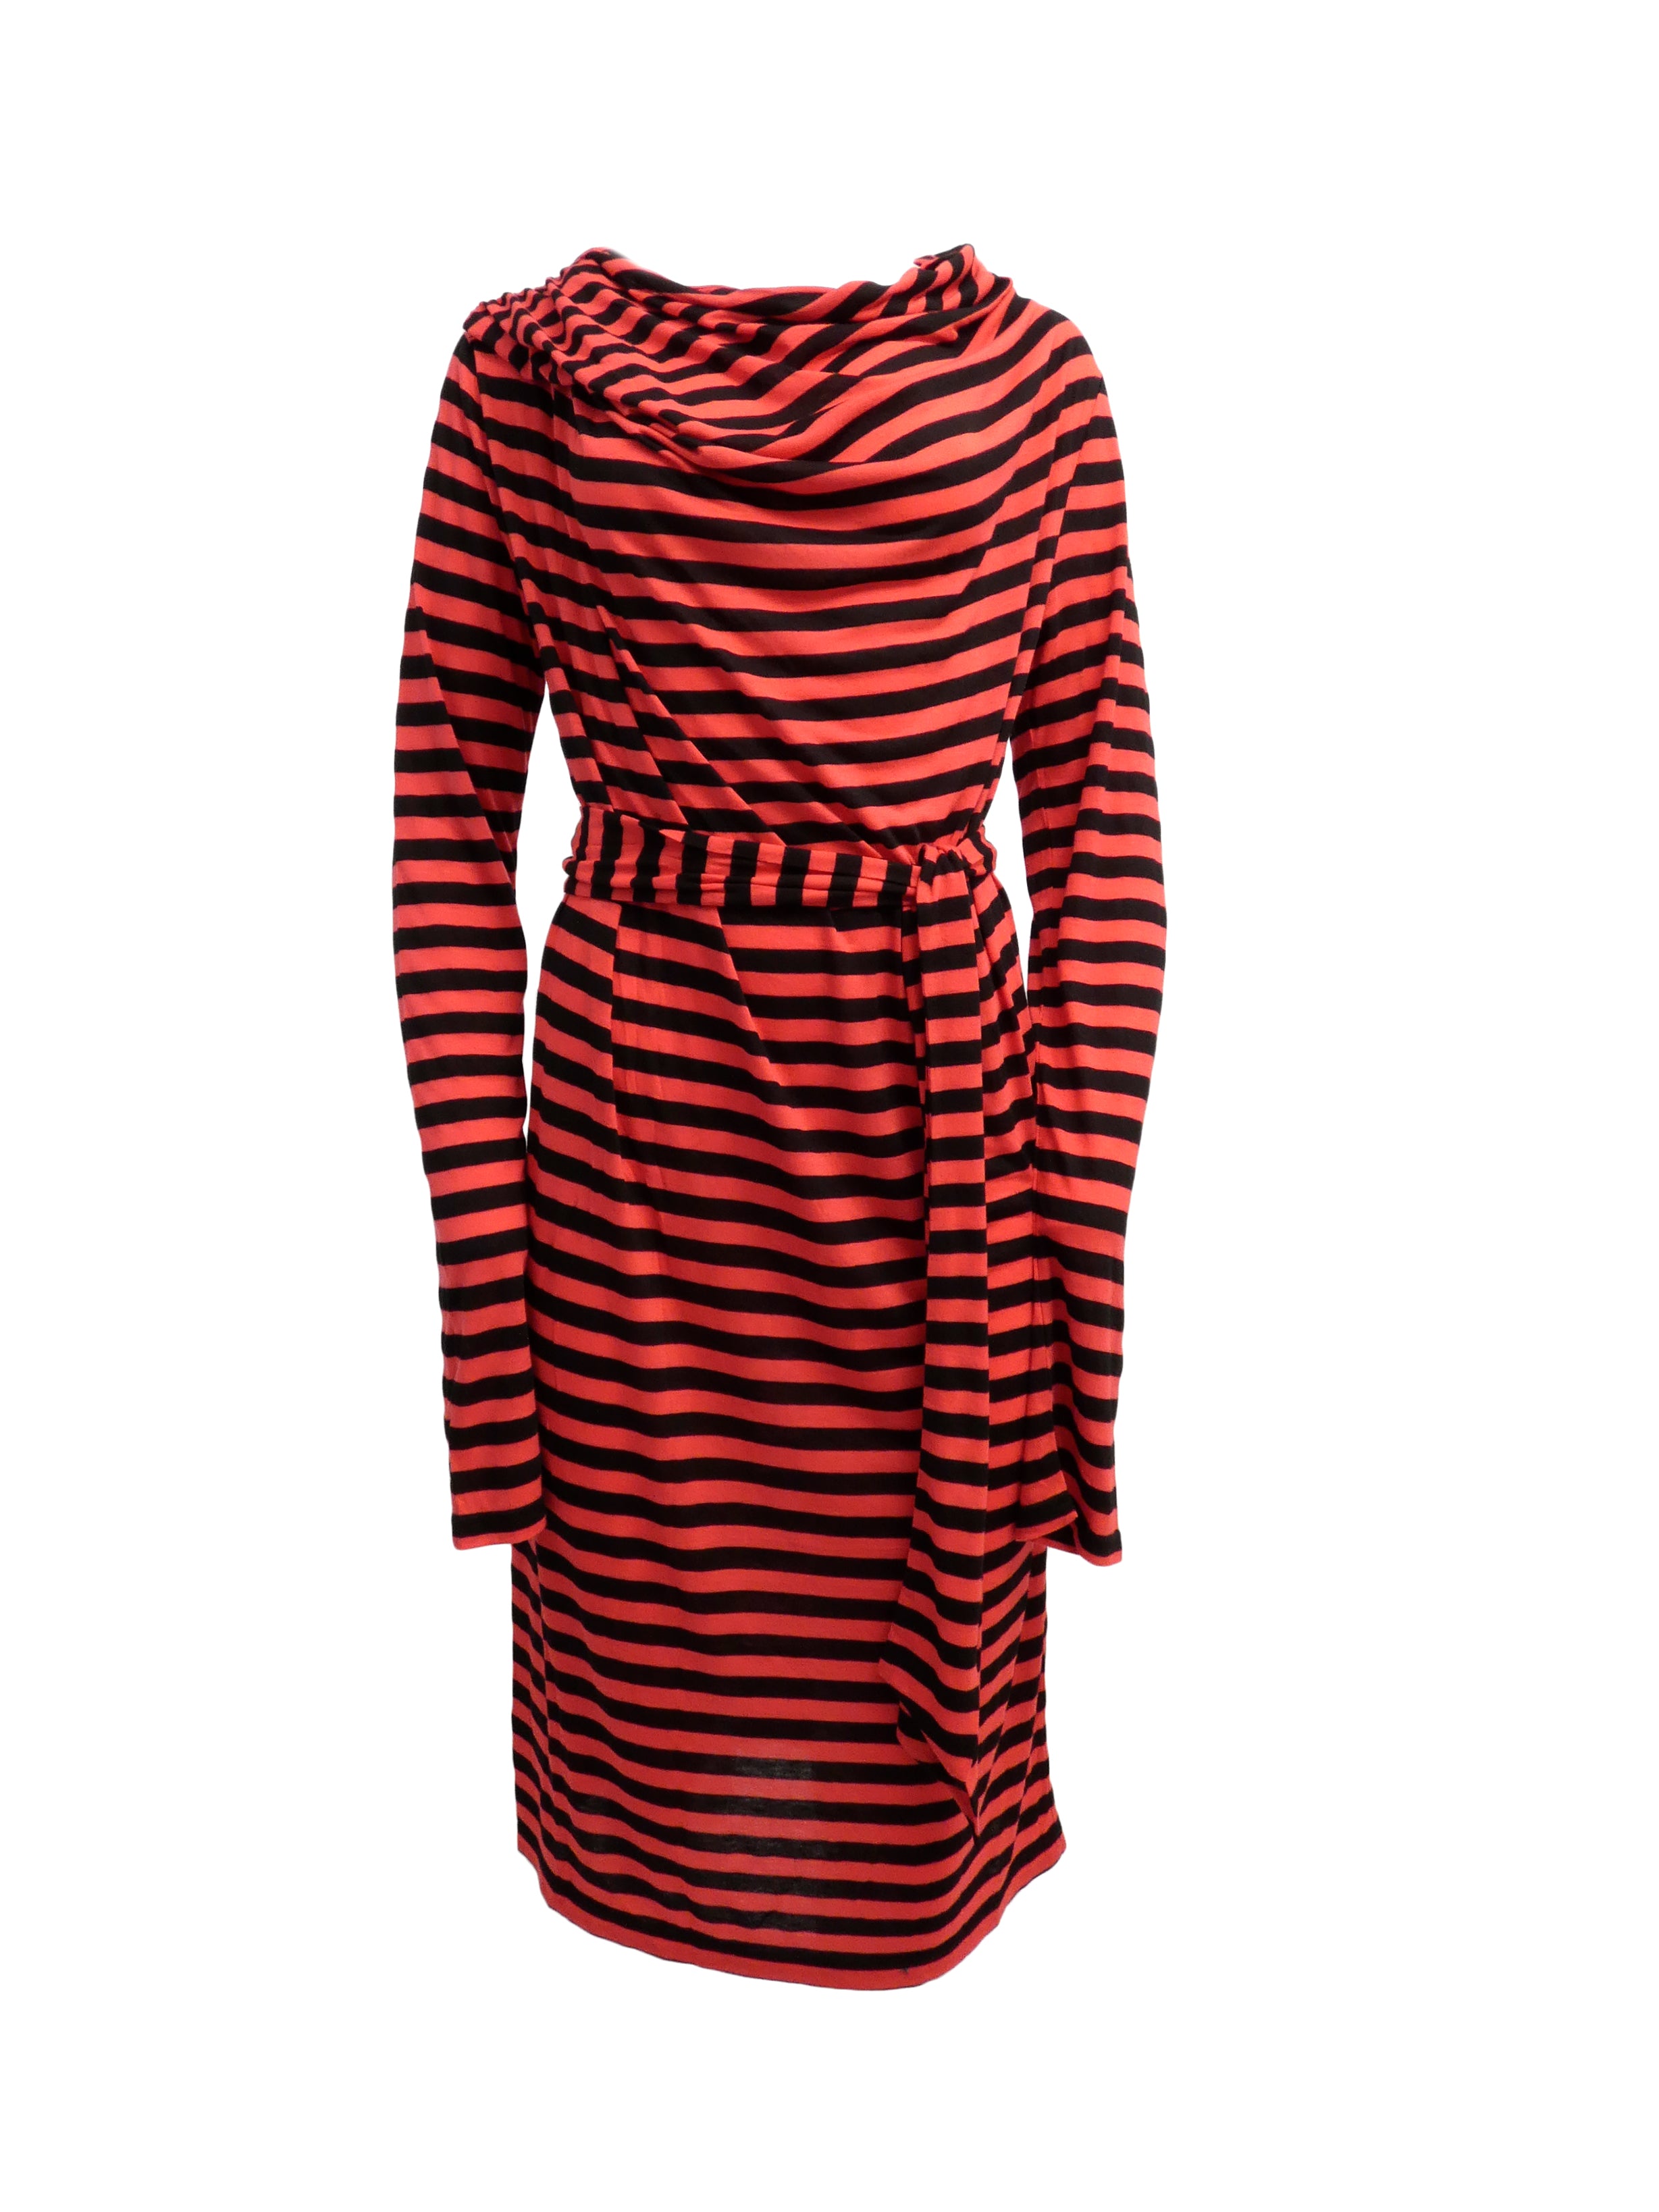 BLACK AND RED STRIPED DRESS